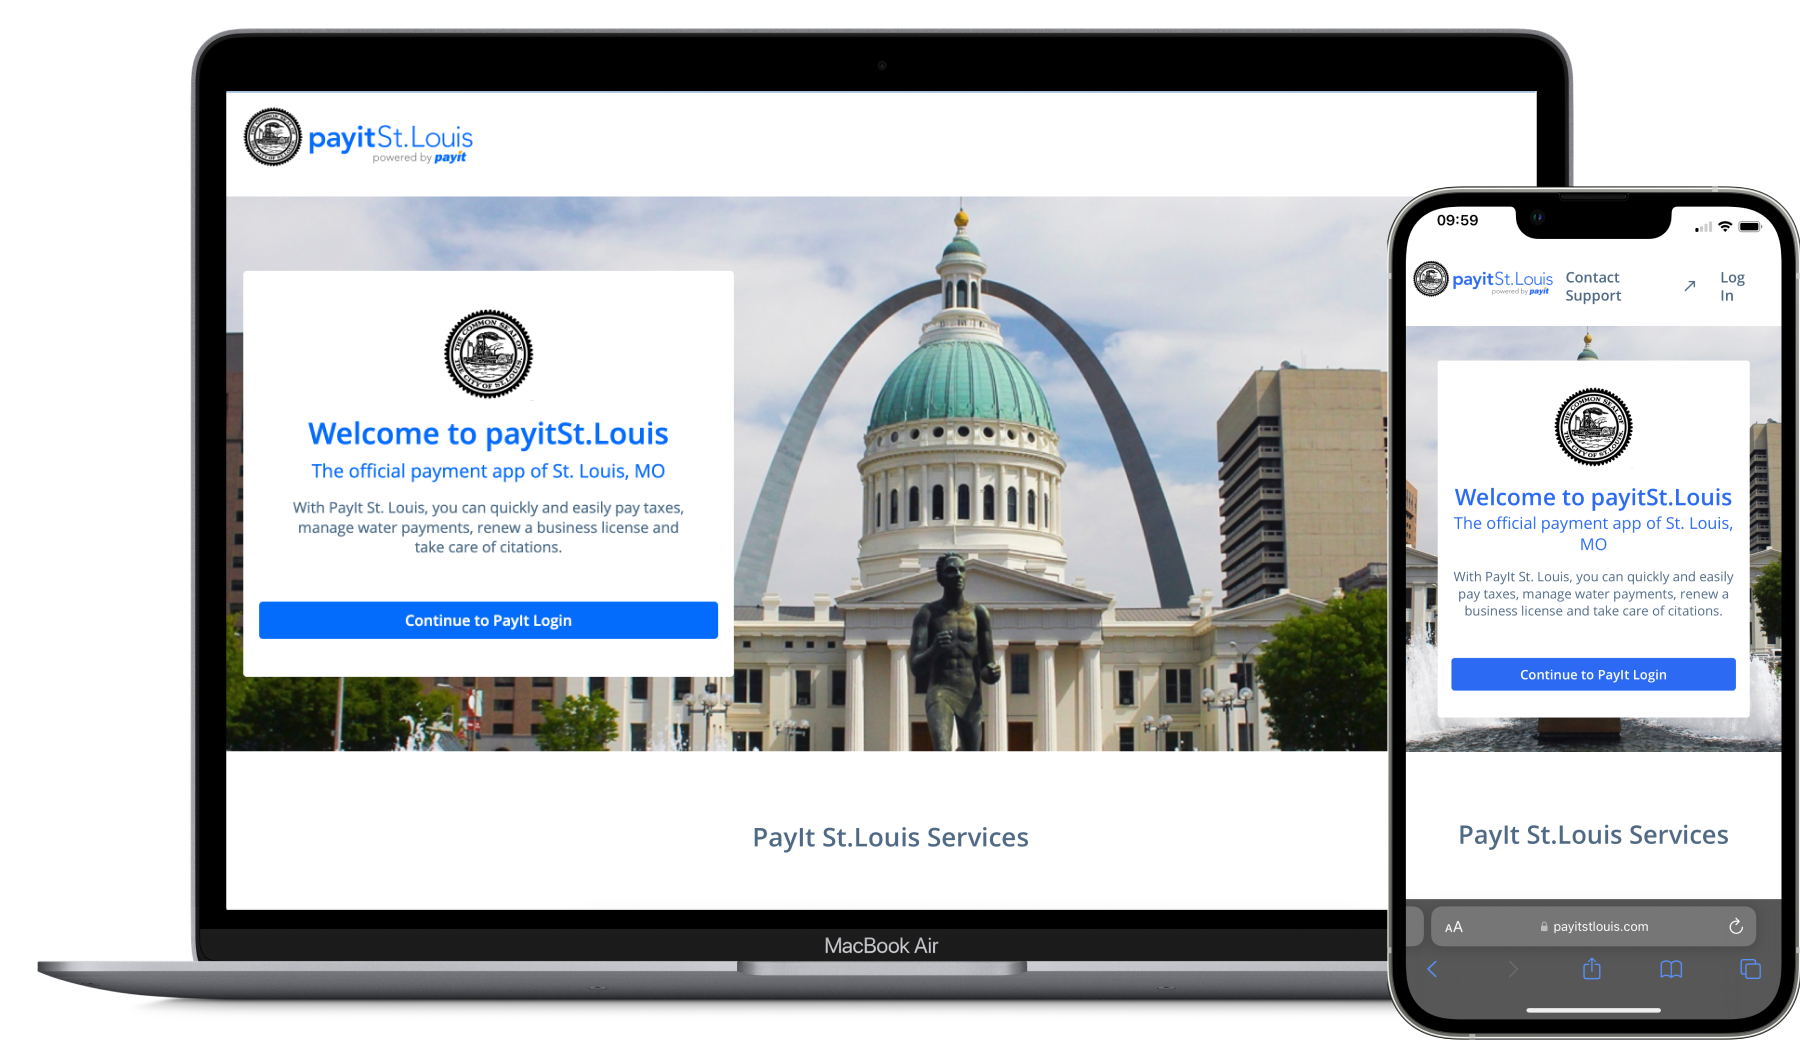 Property tax payment app of the city of St. Louis powered by PayIt 